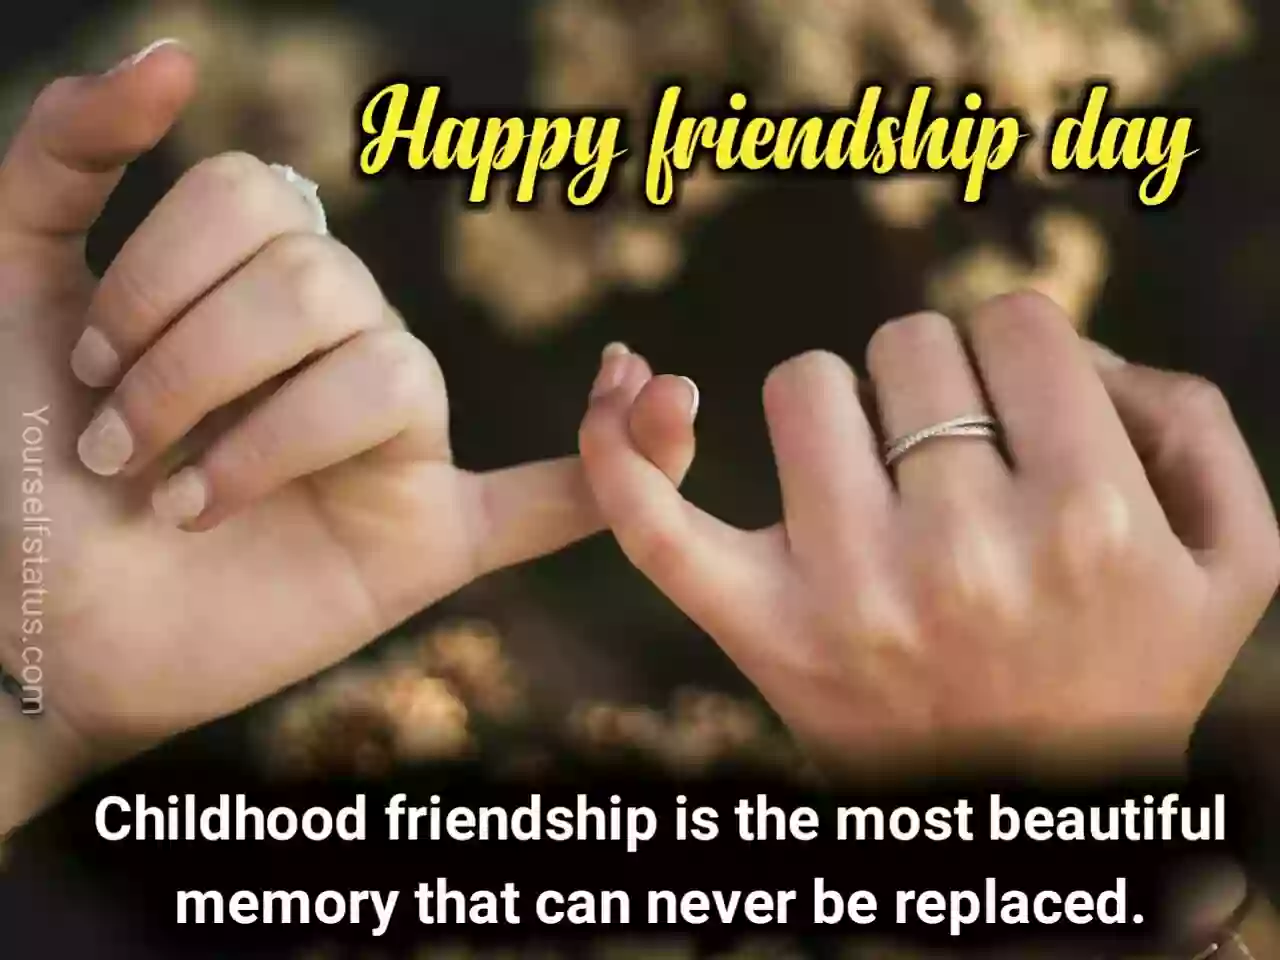 Friendship day images in English